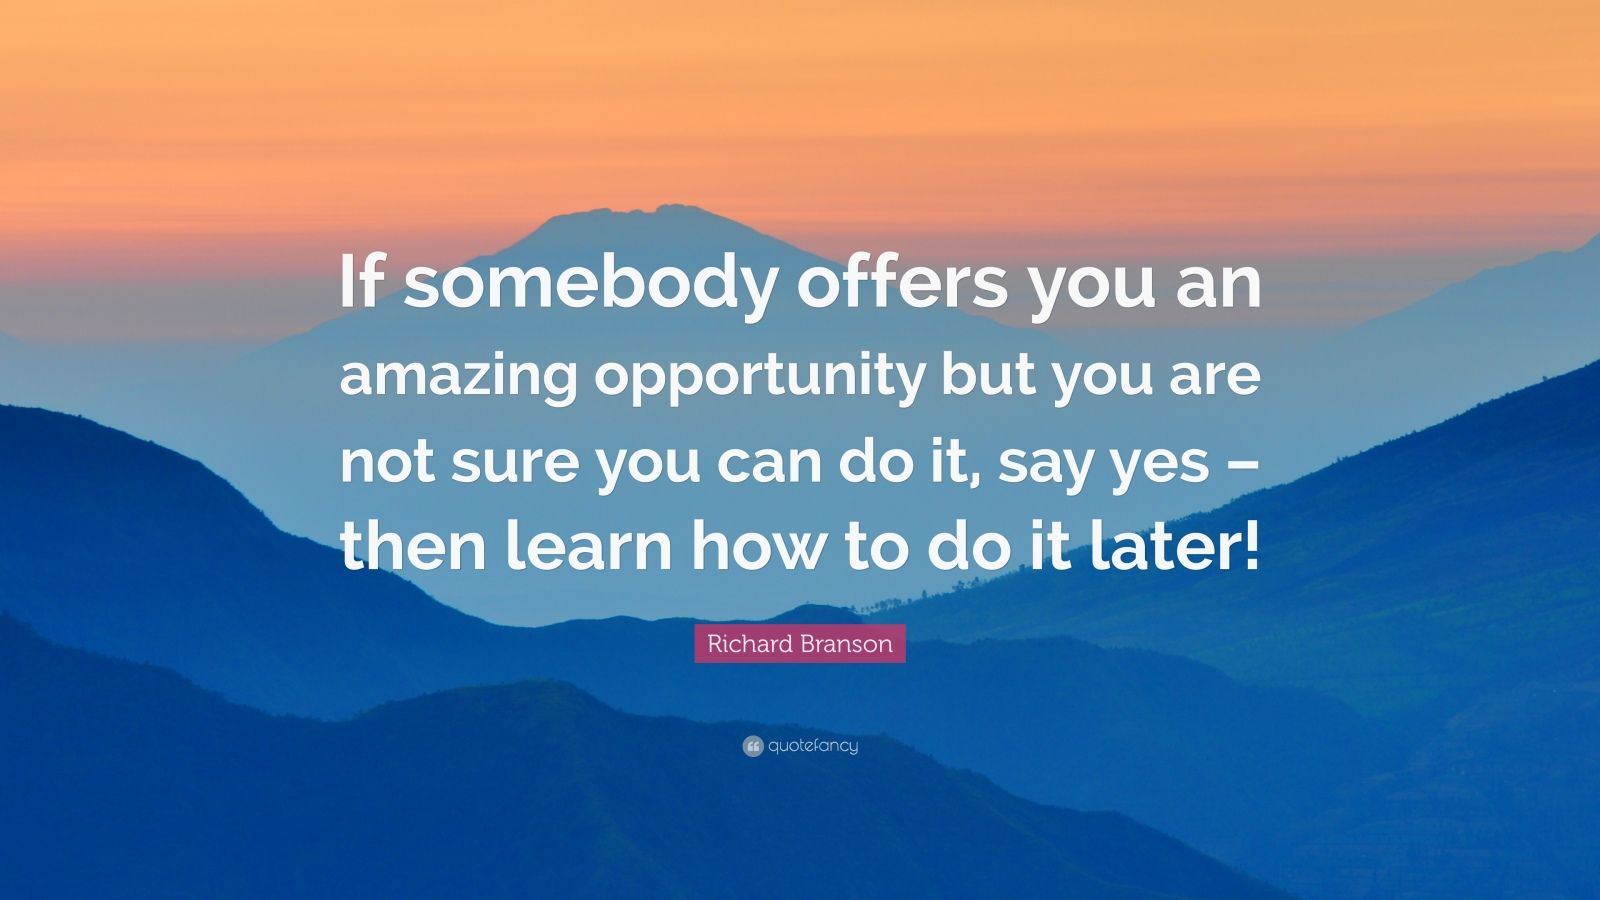 Richard Branson Quote: "If somebody offers you an amazing ...